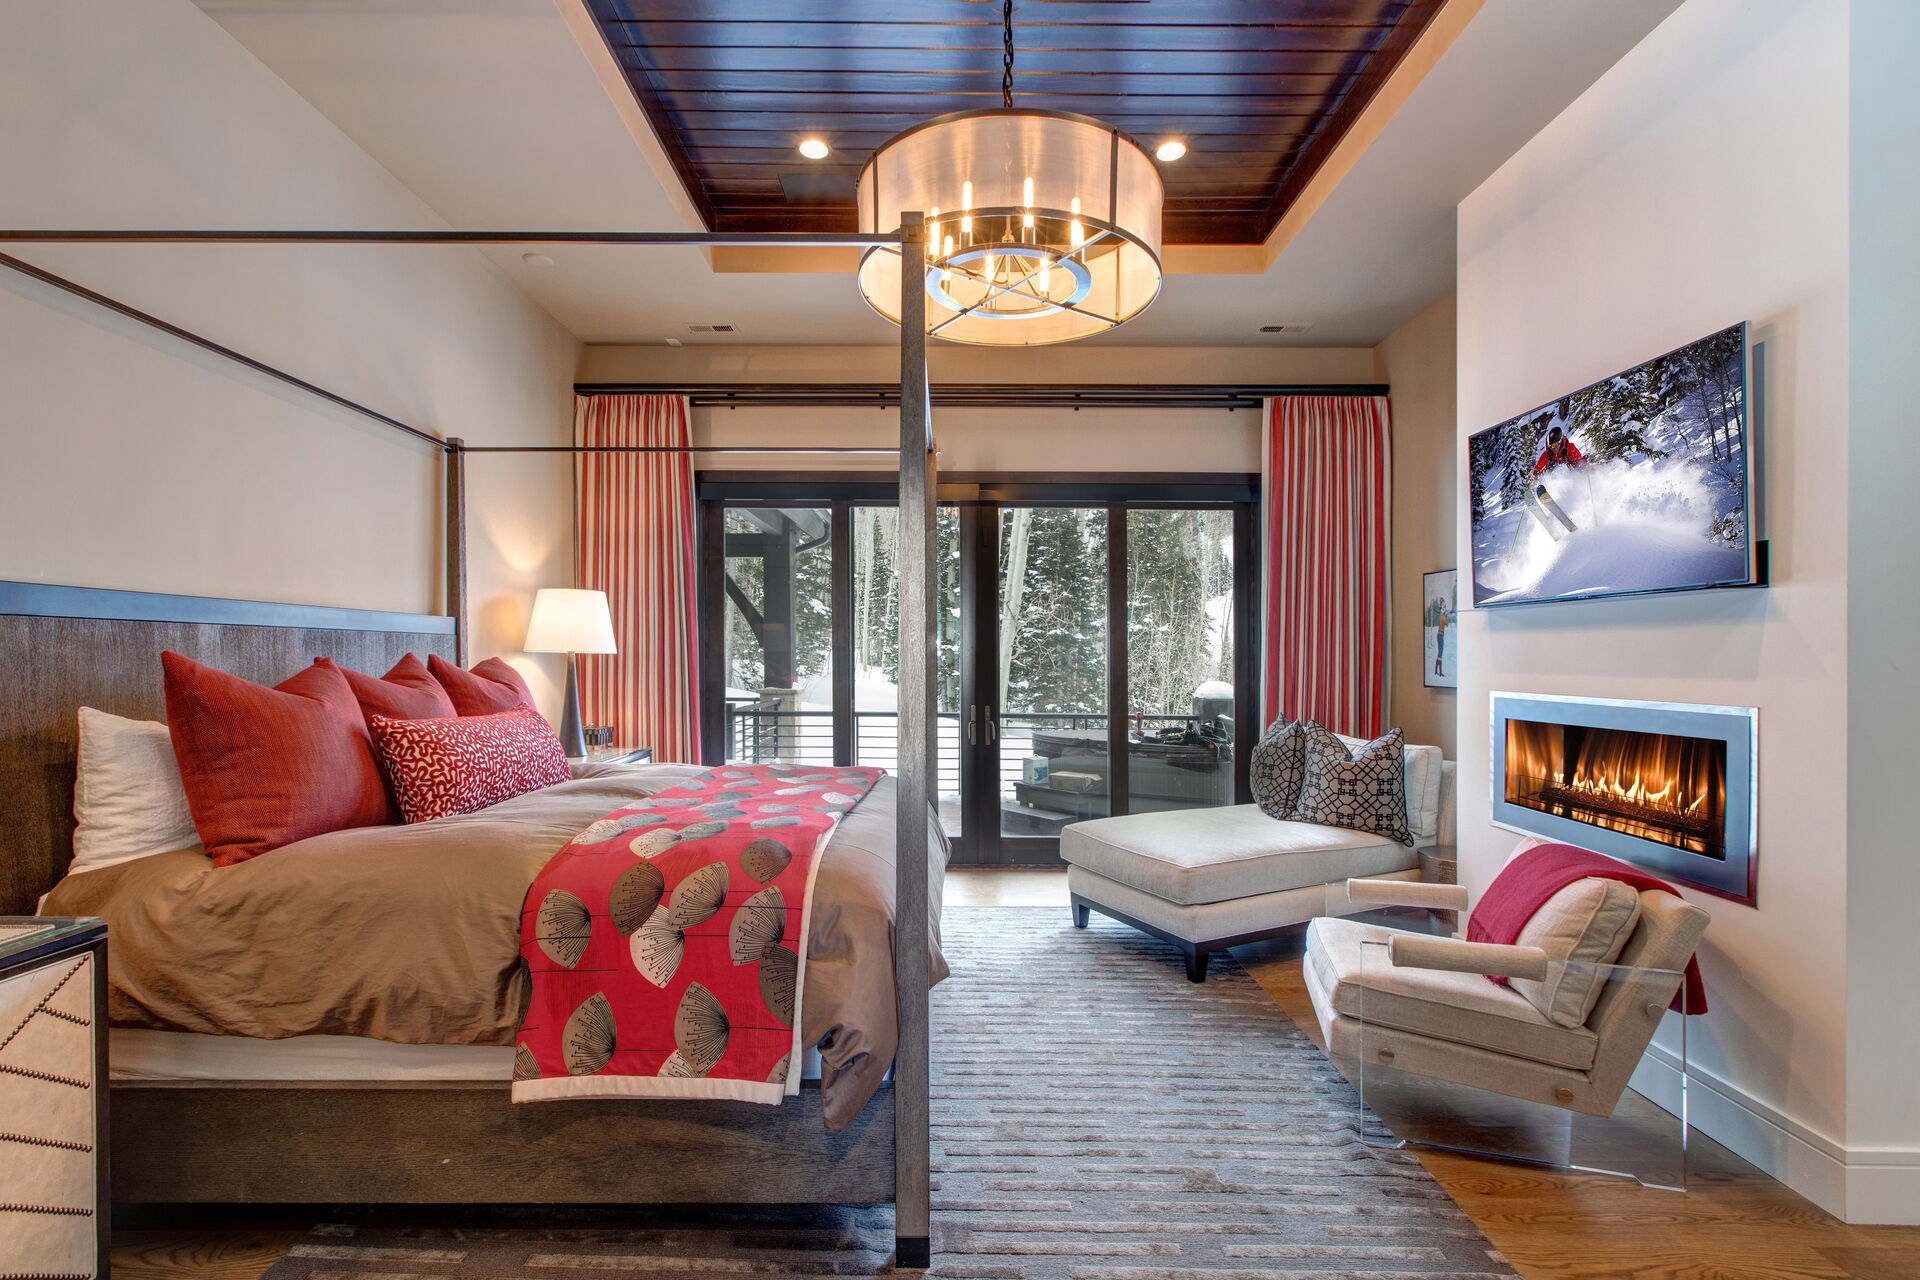 The Bedroom with Large Bed and a Fireplace of Our 6 Bedroom Vacation Homes in Park City, Utah.